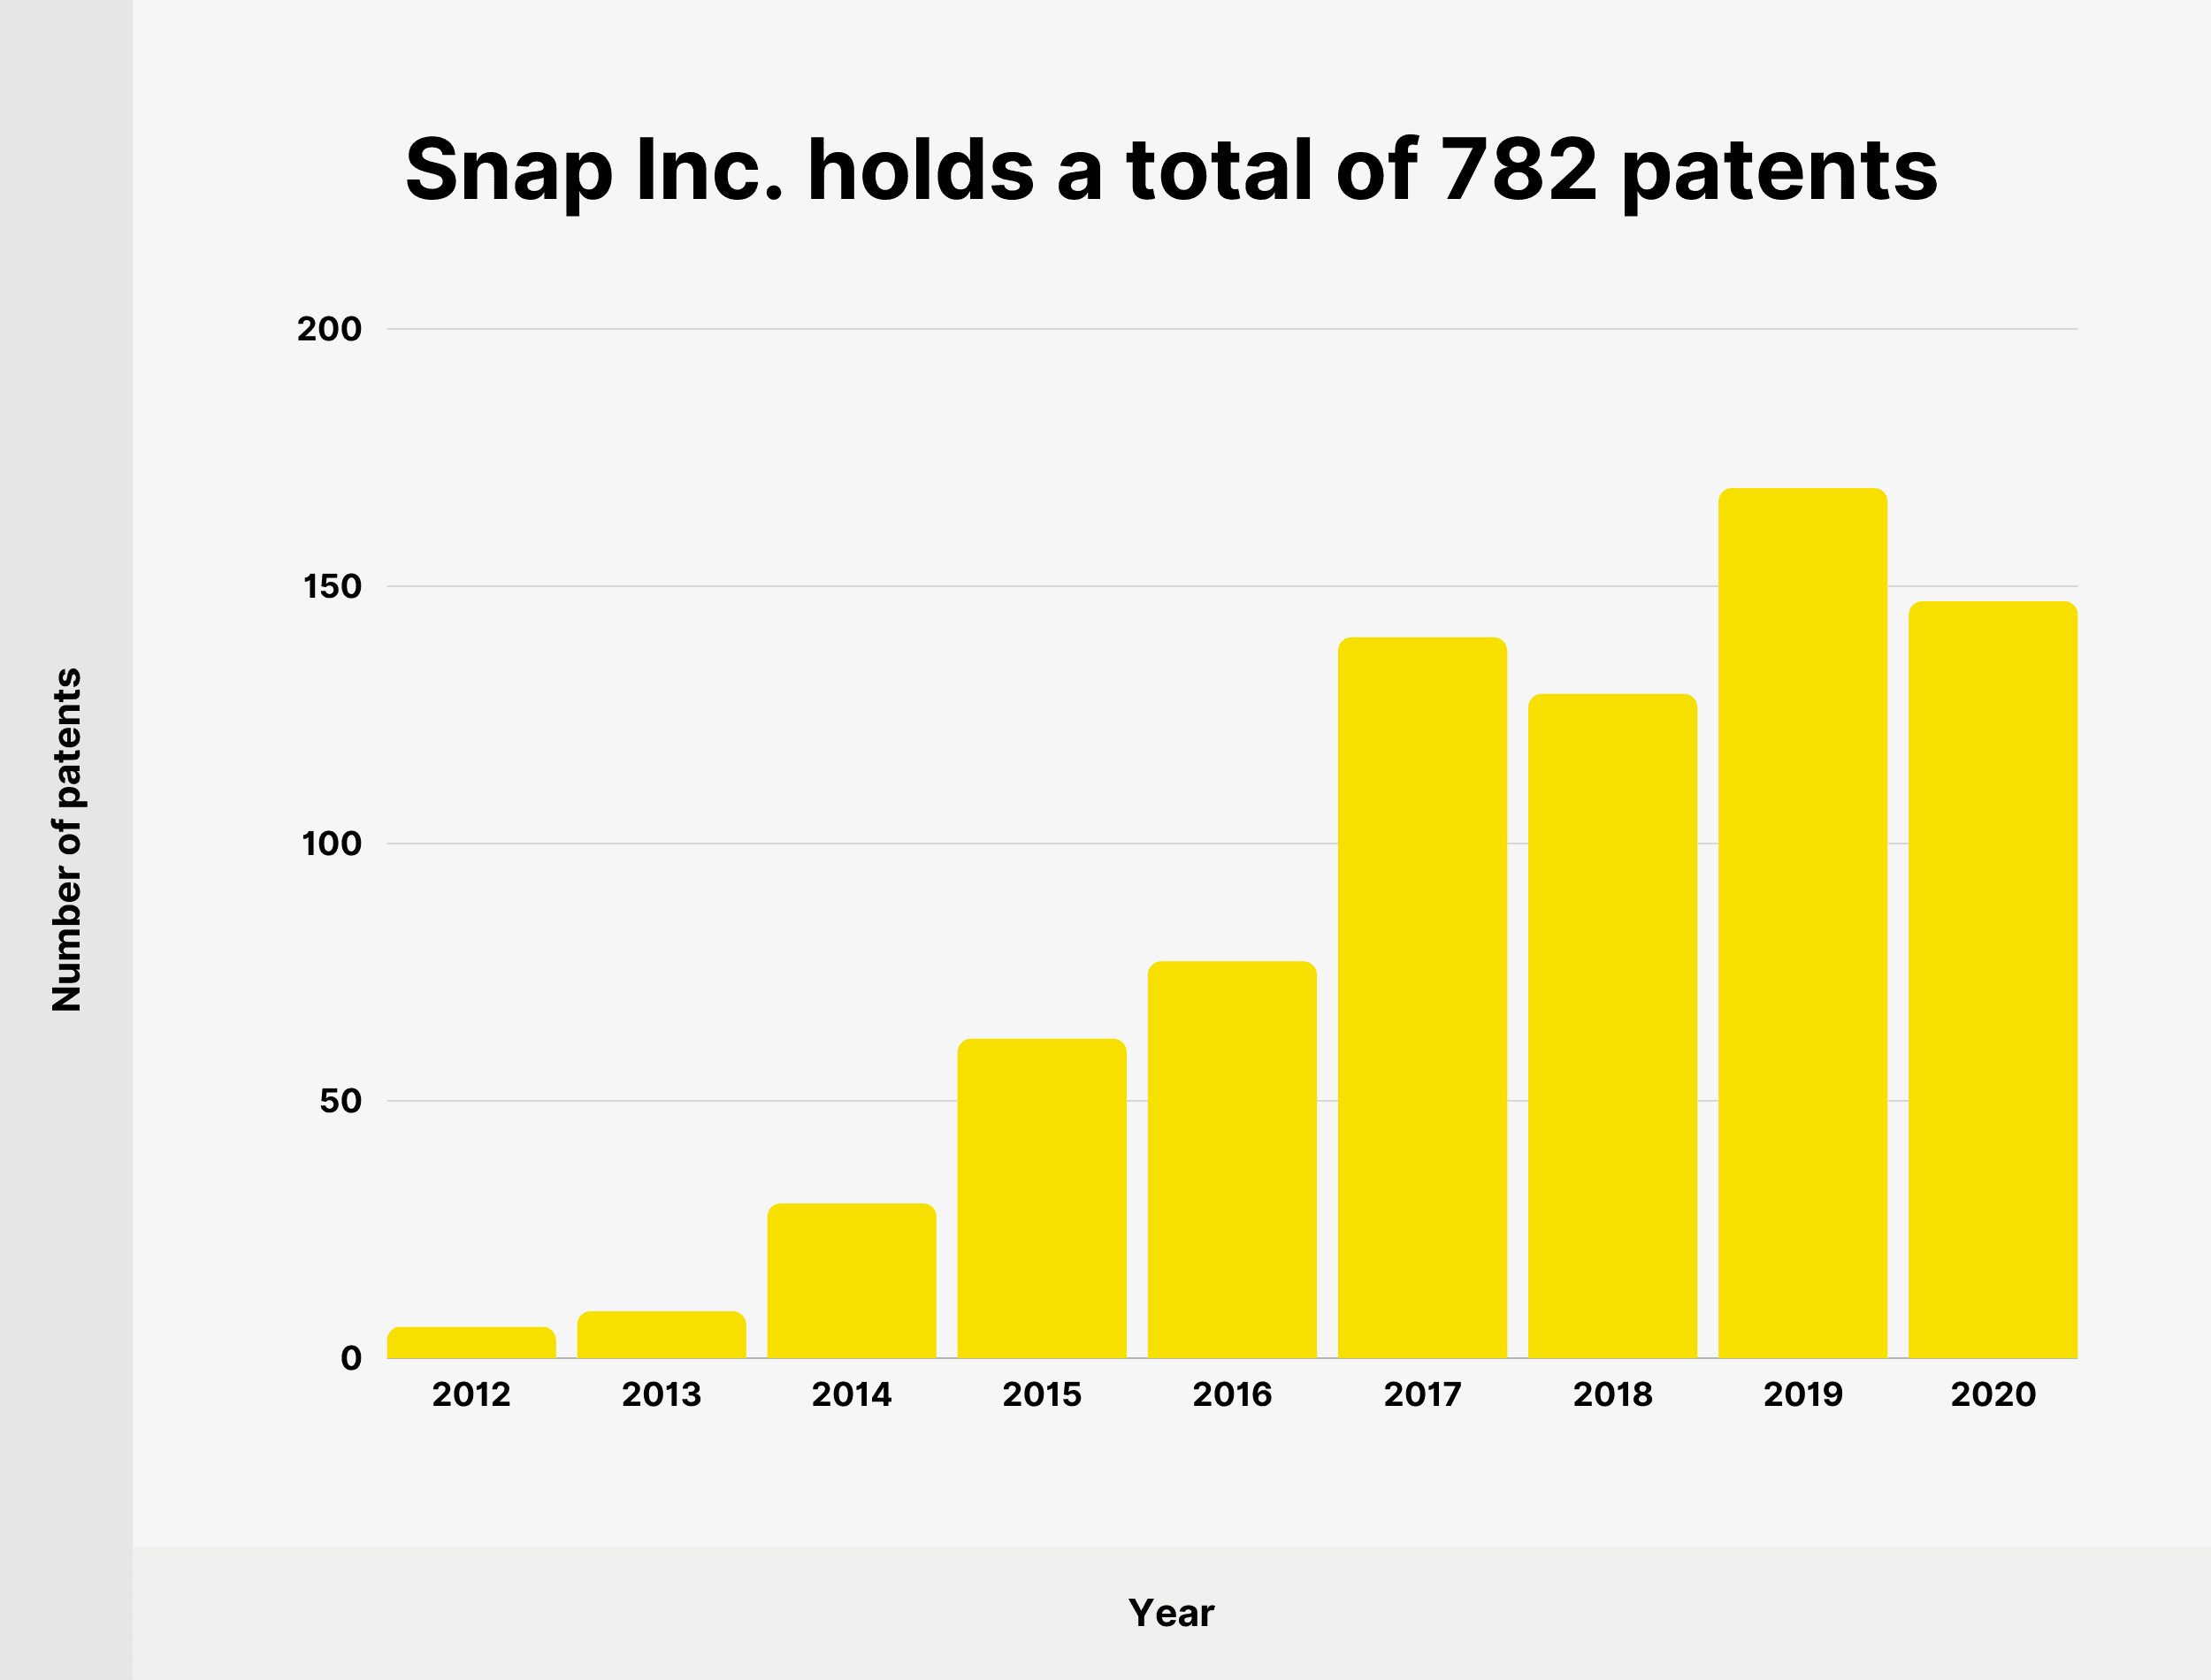 Snap Inc. holds a total of 782 patents